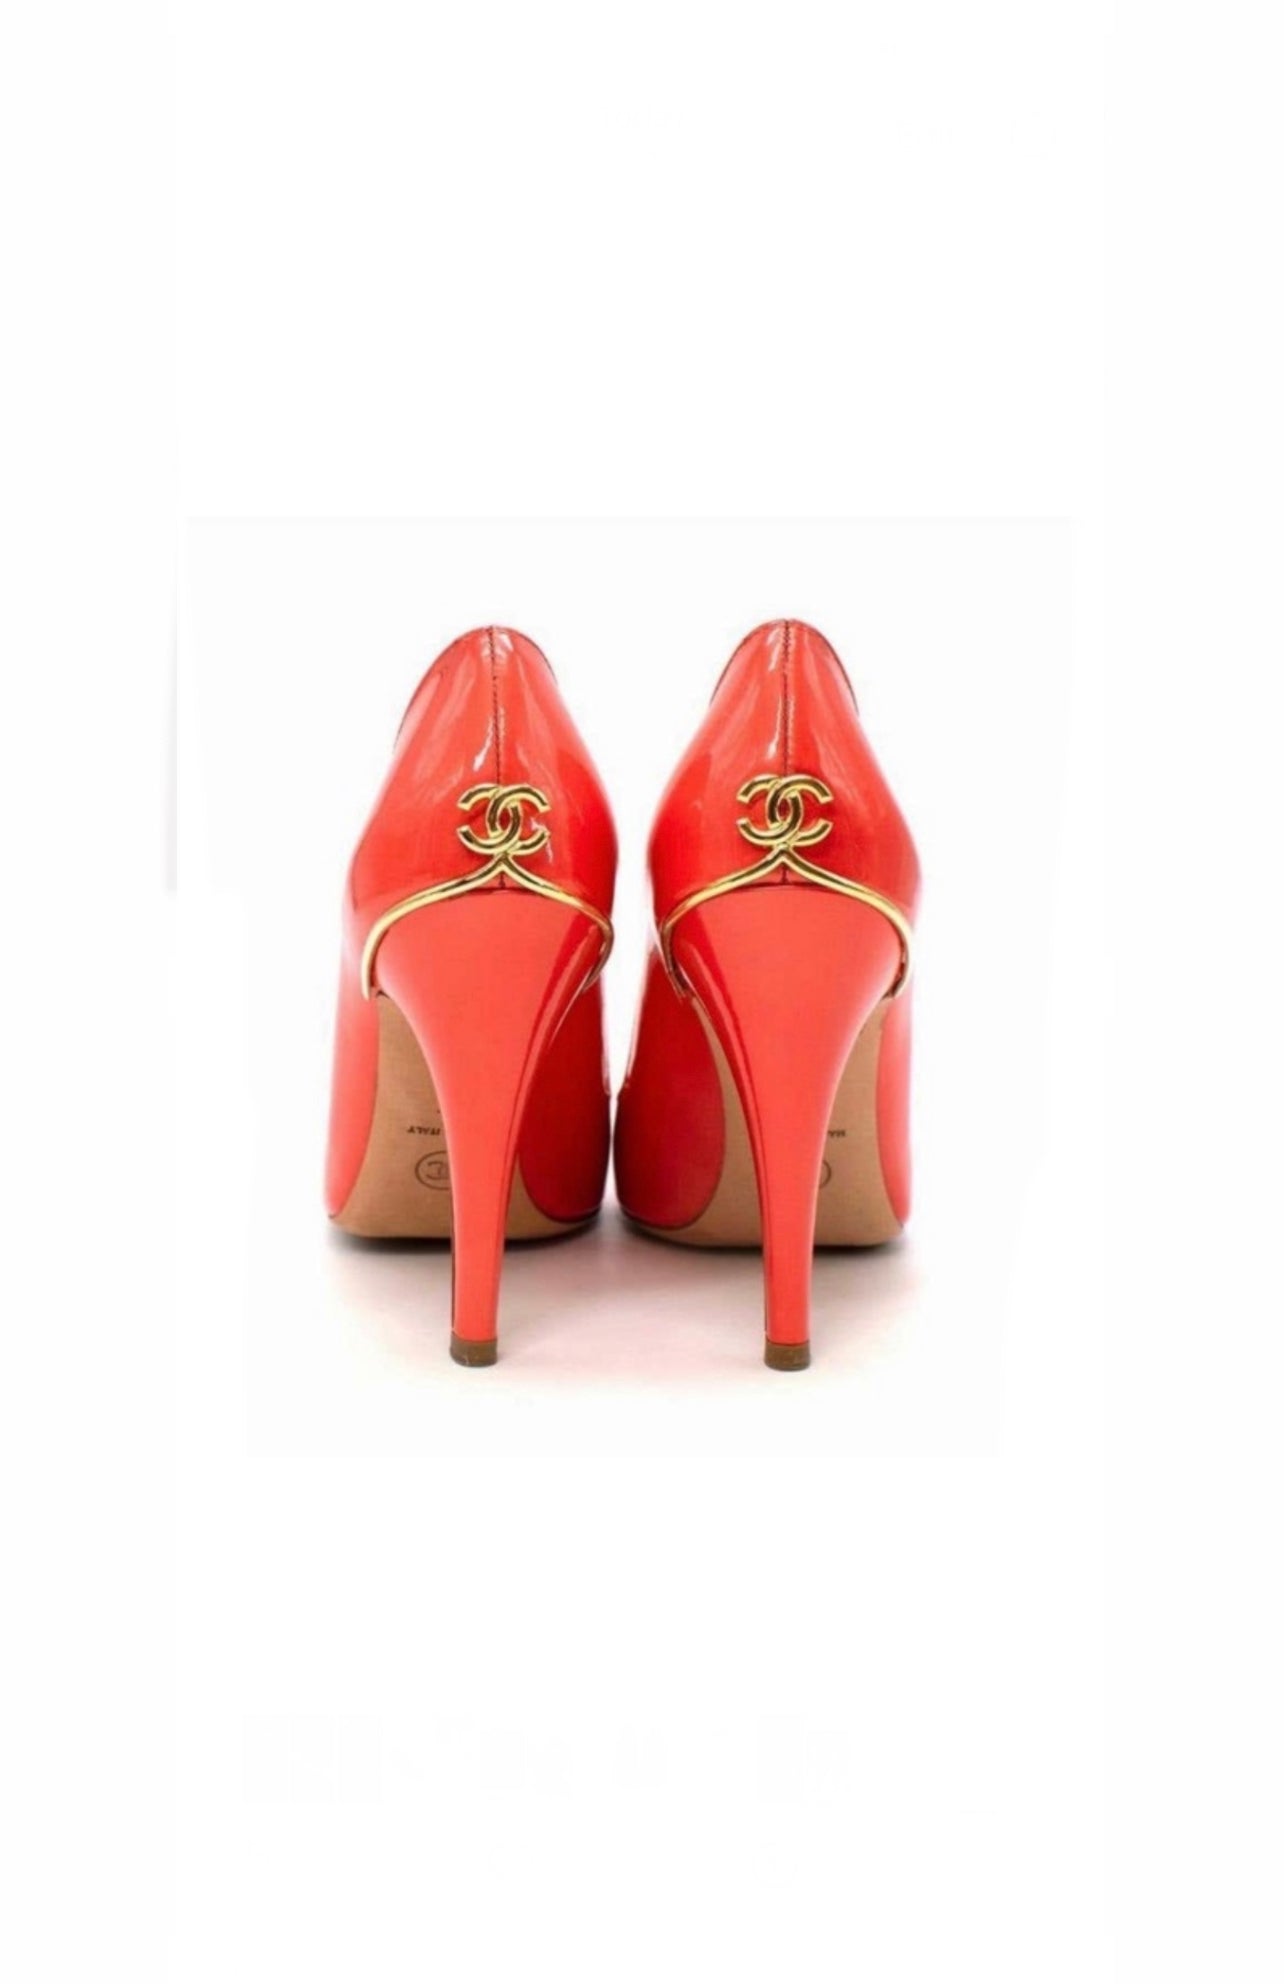 Load image into Gallery viewer, Chanel Coral Heels 2008 Cruise Collection
